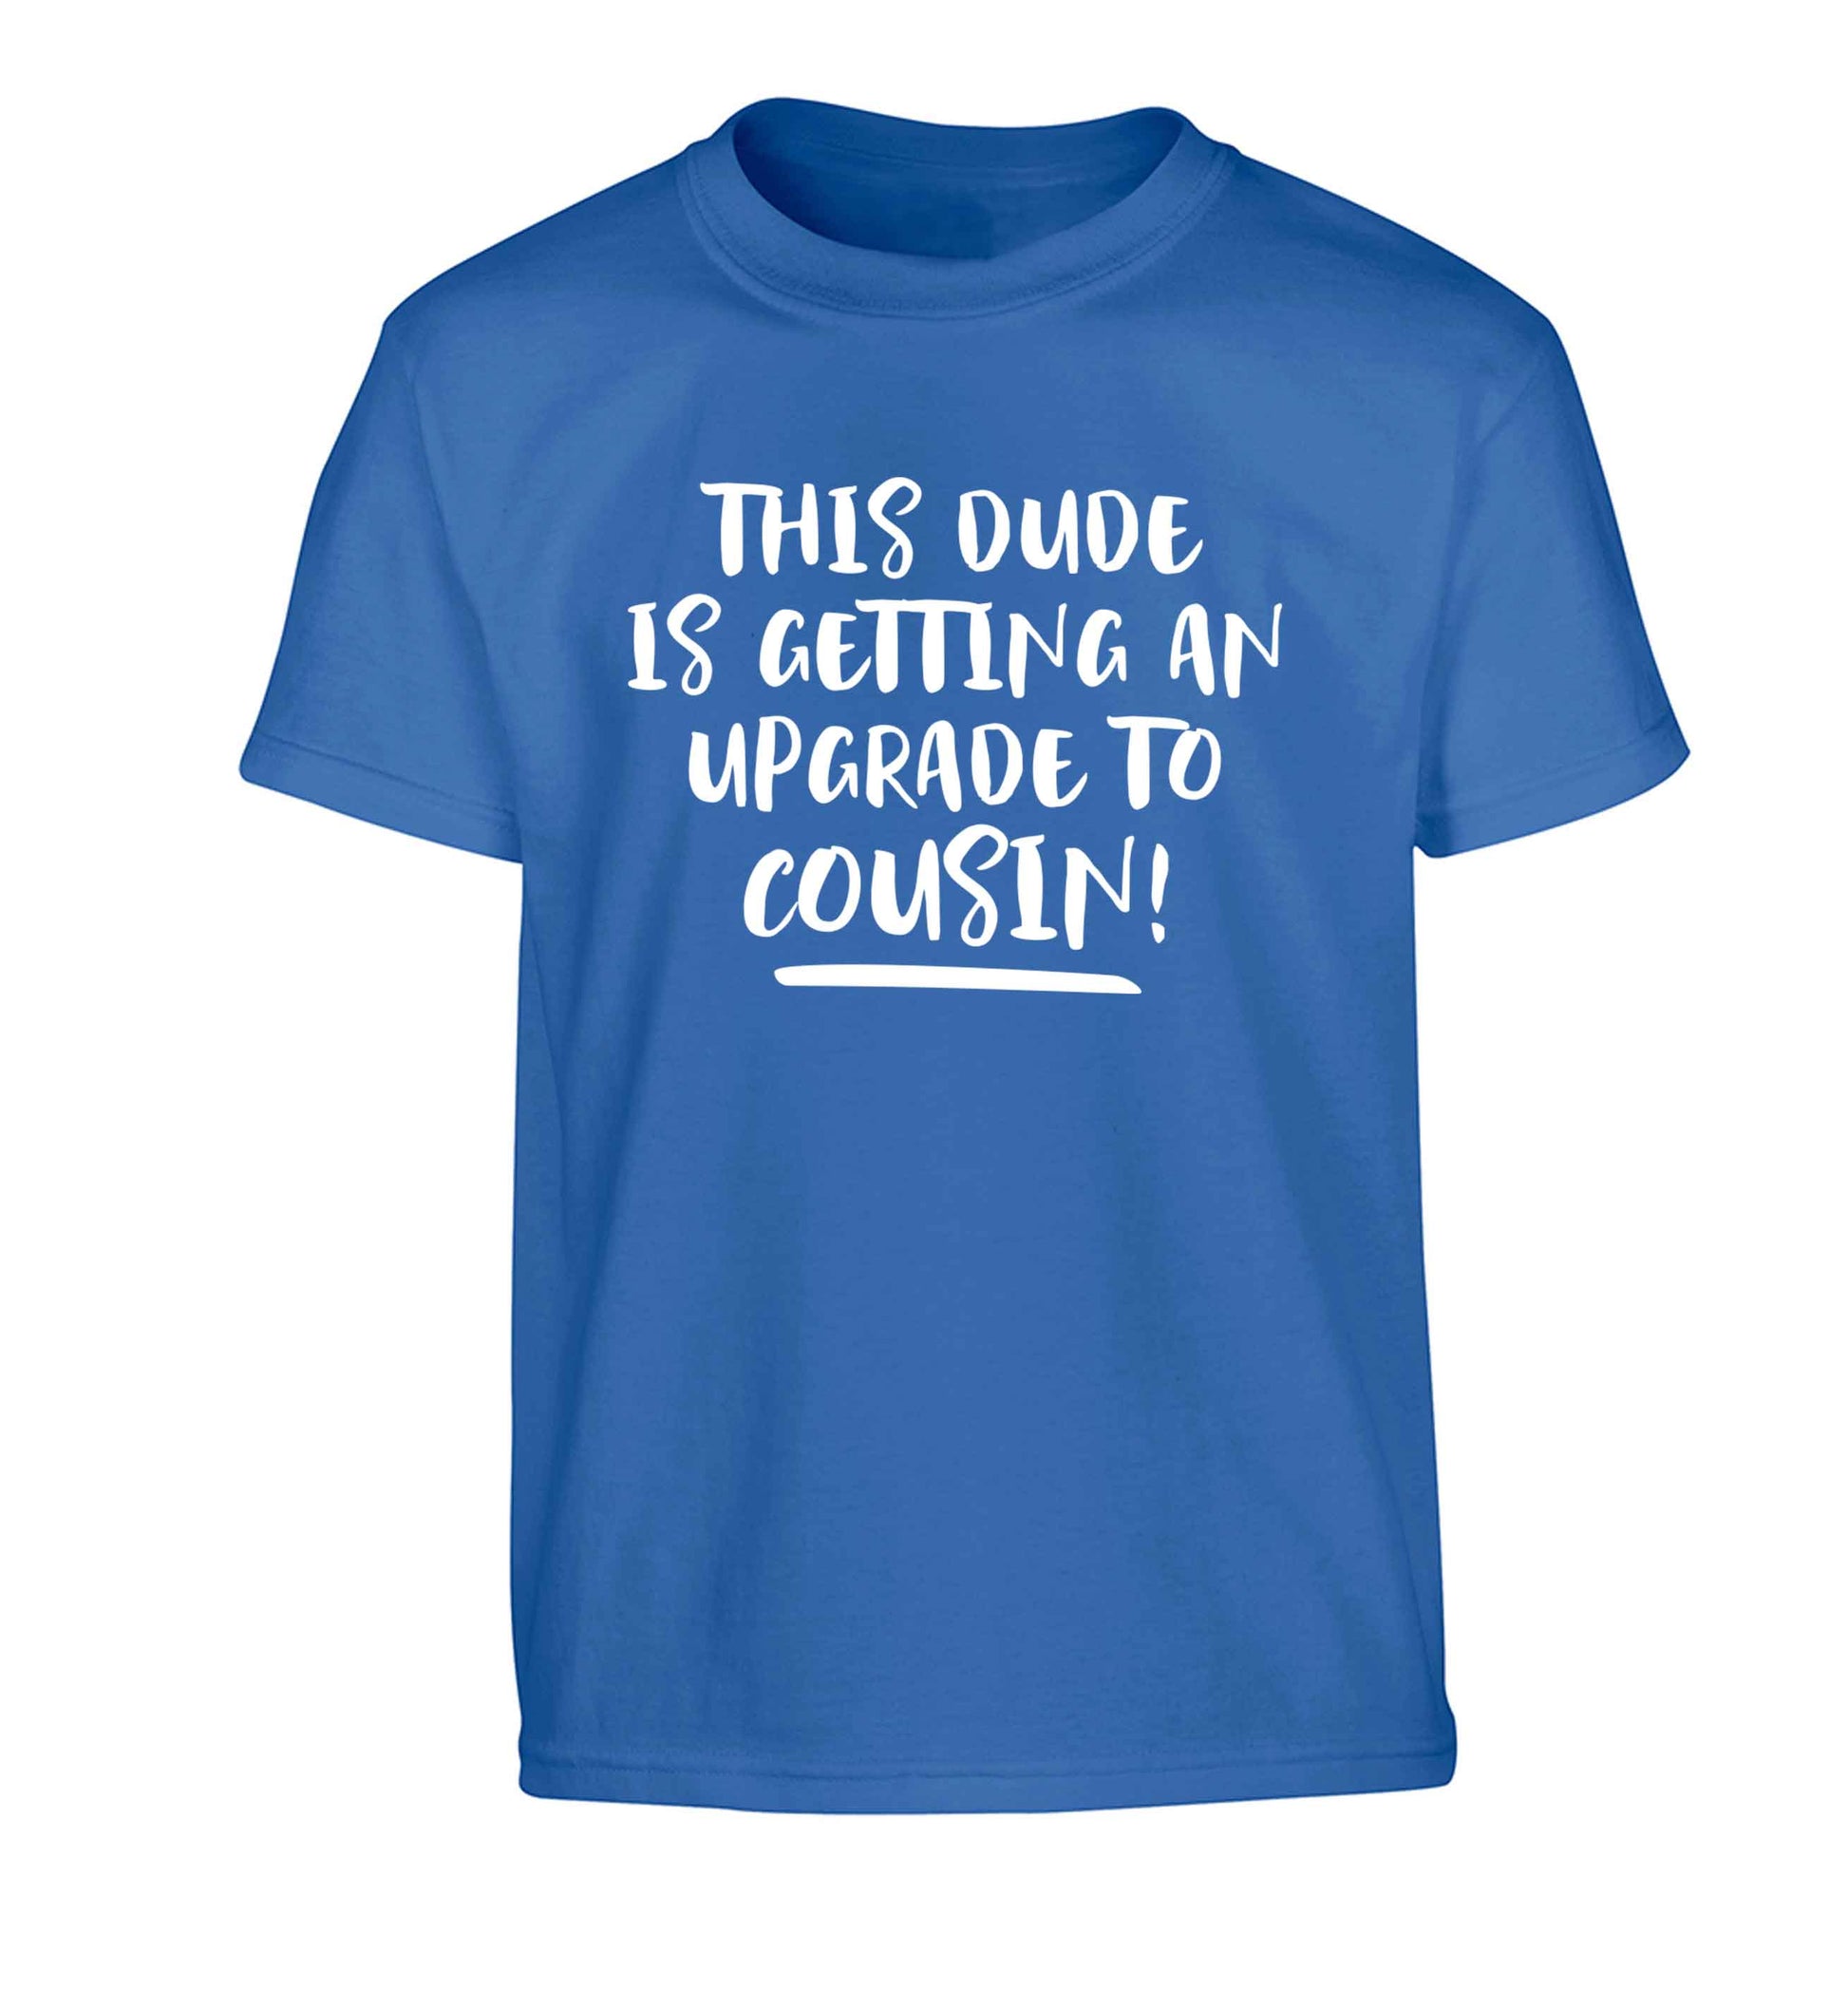 This dude is getting an upgrade to cousin! Children's blue Tshirt 12-13 Years